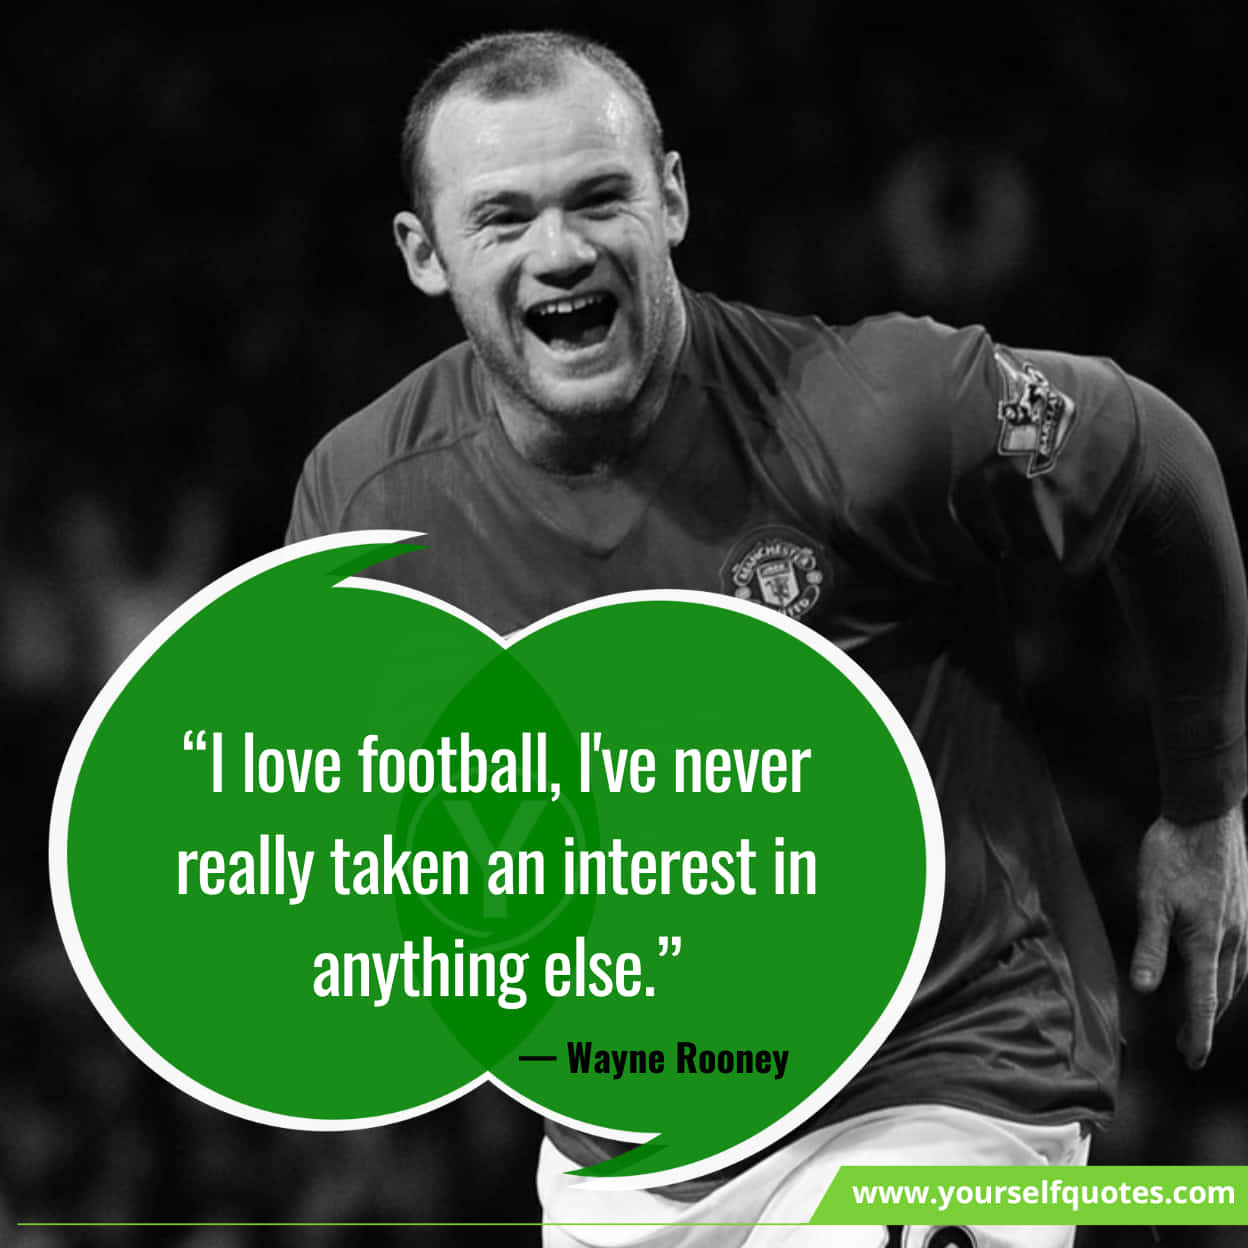 Wayne Rooney Positive Quotes On Life